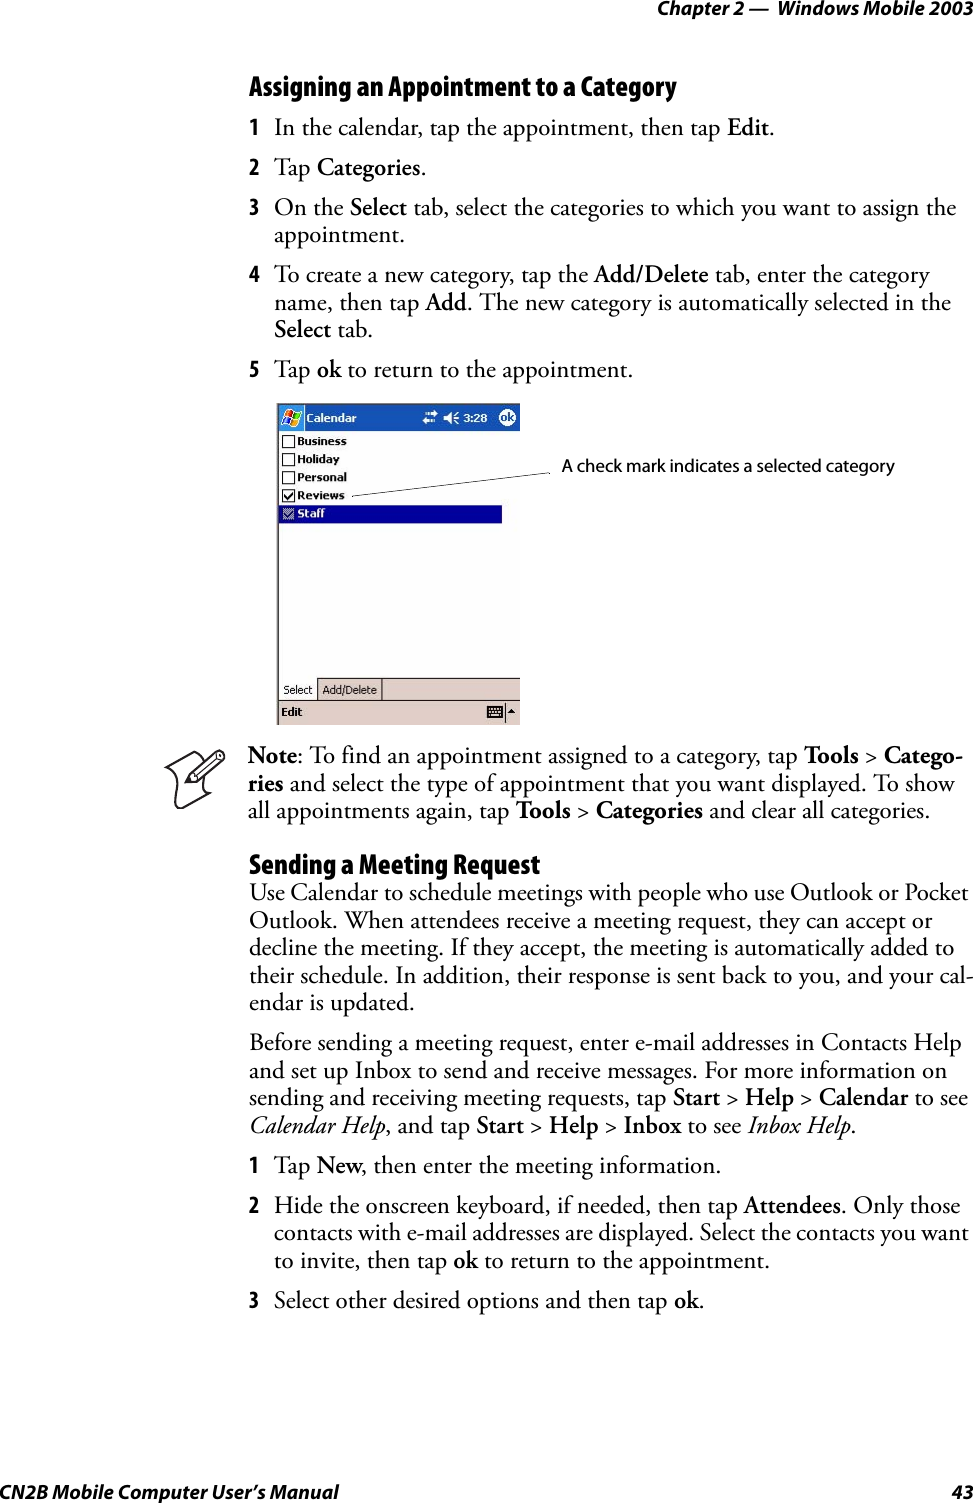 Chapter 2 —  Windows Mobile 2003CN2B Mobile Computer User’s Manual 43Assigning an Appointment to a Category1In the calendar, tap the appointment, then tap Edit.2Tap Categories.3On the Select tab, select the categories to which you want to assign the appointment.4To create a new category, tap the Add/Delete tab, enter the category name, then tap Add. The new category is automatically selected in the Select tab.5Tap ok to return to the appointment.Sending a Meeting RequestUse Calendar to schedule meetings with people who use Outlook or Pocket Outlook. When attendees receive a meeting request, they can accept or decline the meeting. If they accept, the meeting is automatically added to their schedule. In addition, their response is sent back to you, and your cal-endar is updated.Before sending a meeting request, enter e-mail addresses in Contacts Help and set up Inbox to send and receive messages. For more information on sending and receiving meeting requests, tap Start &gt; Help &gt; Calendar to see Calendar Help, and tap Start &gt; Help &gt; Inbox to see Inbox Help.1Tap New, then enter the meeting information.2Hide the onscreen keyboard, if needed, then tap Attendees. Only those contacts with e-mail addresses are displayed. Select the contacts you want to invite, then tap ok to return to the appointment.3Select other desired options and then tap ok.Note: To find an appointment assigned to a category, tap Tools &gt; Catego-ries and select the type of appointment that you want displayed. To show all appointments again, tap To o l s  &gt; Categories and clear all categories.A check mark indicates a selected category